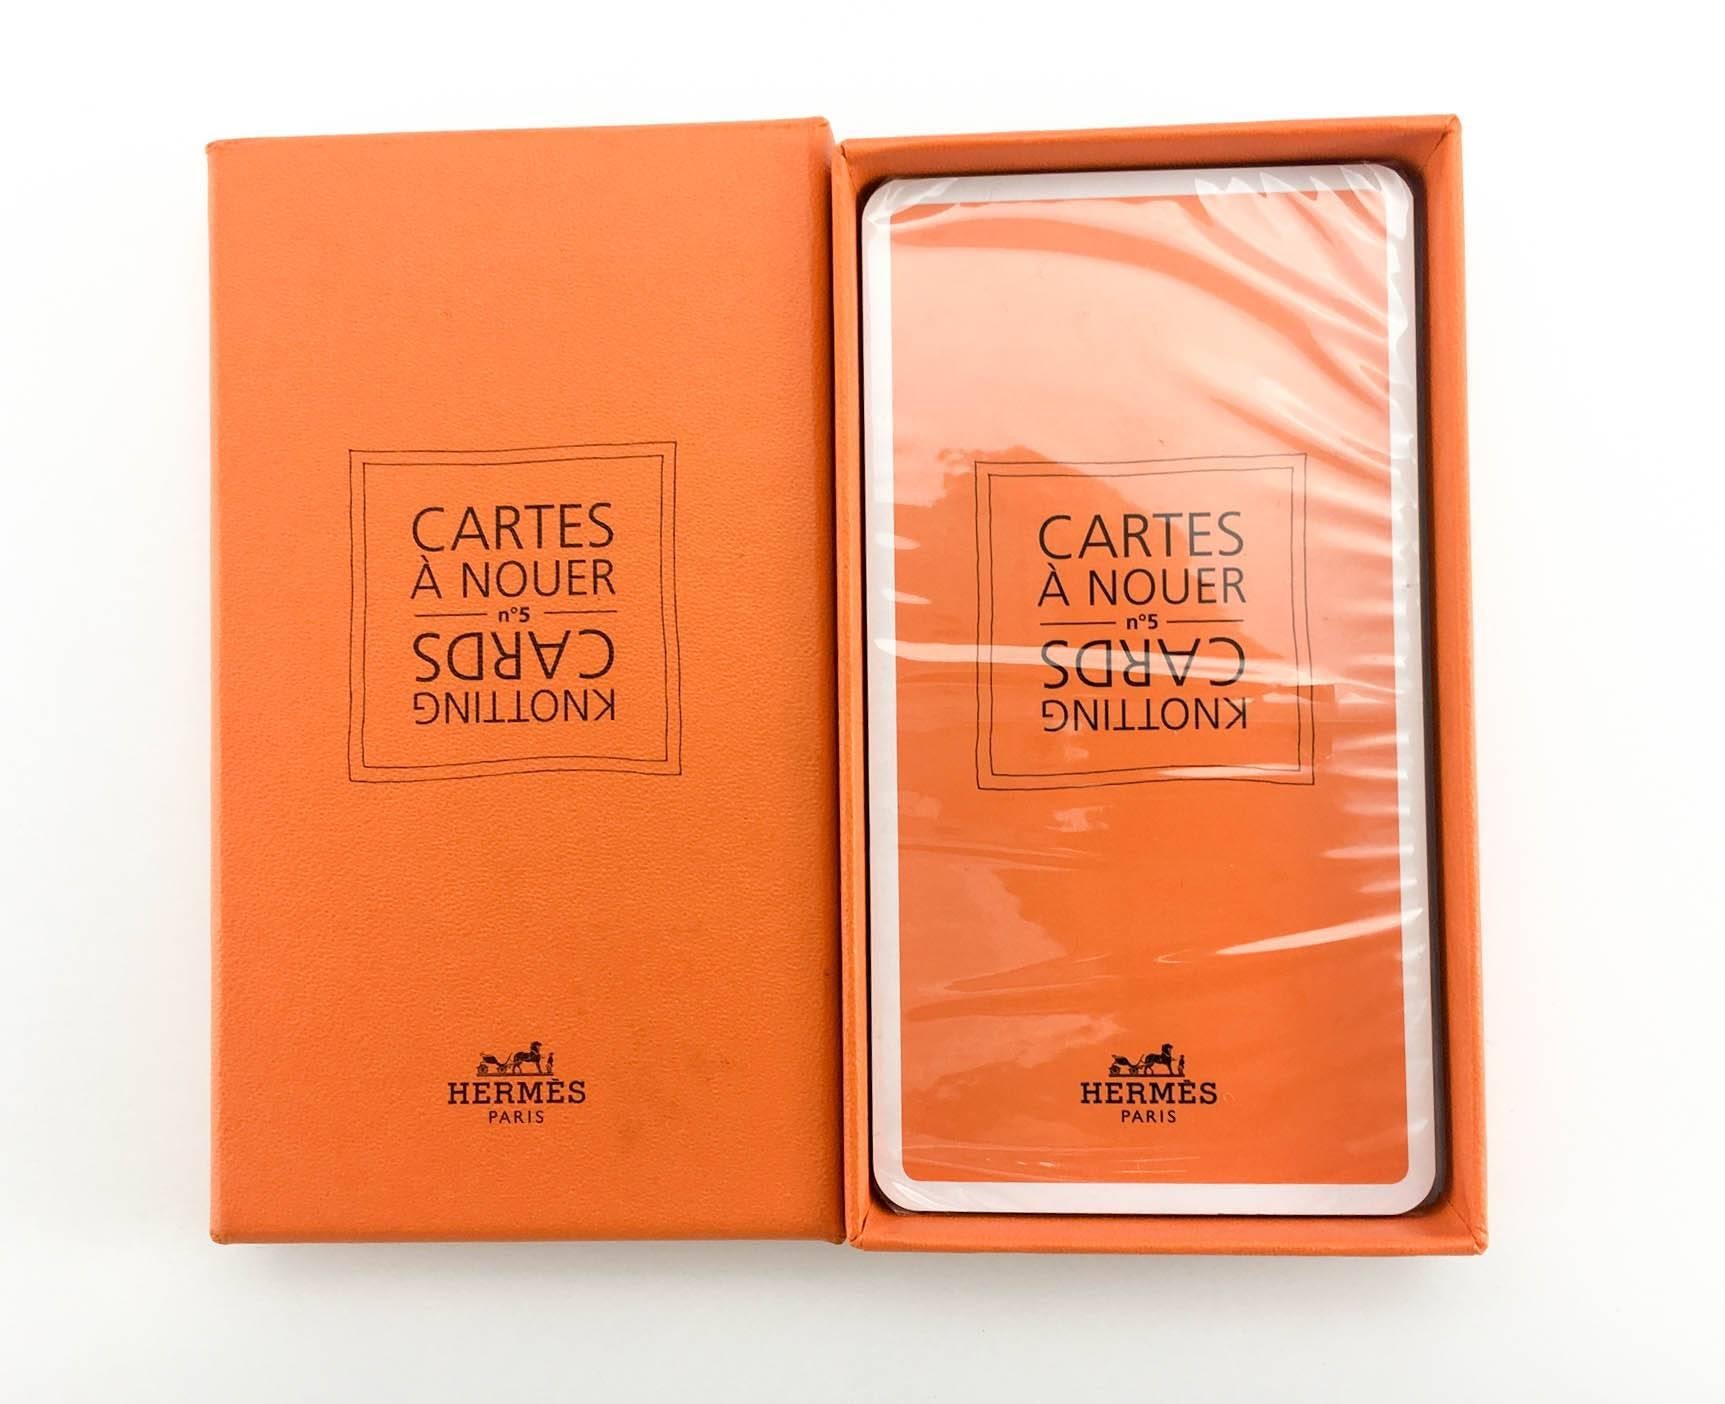 Hermes Scarf Cartes A Nouer / Knotting Cards. An unopened set of cards by Hermes teaching different ways to wear their iconic scarves. These cards are not sold by Hermes anymore, which makes them highly sought after and collectable. The perfect gift